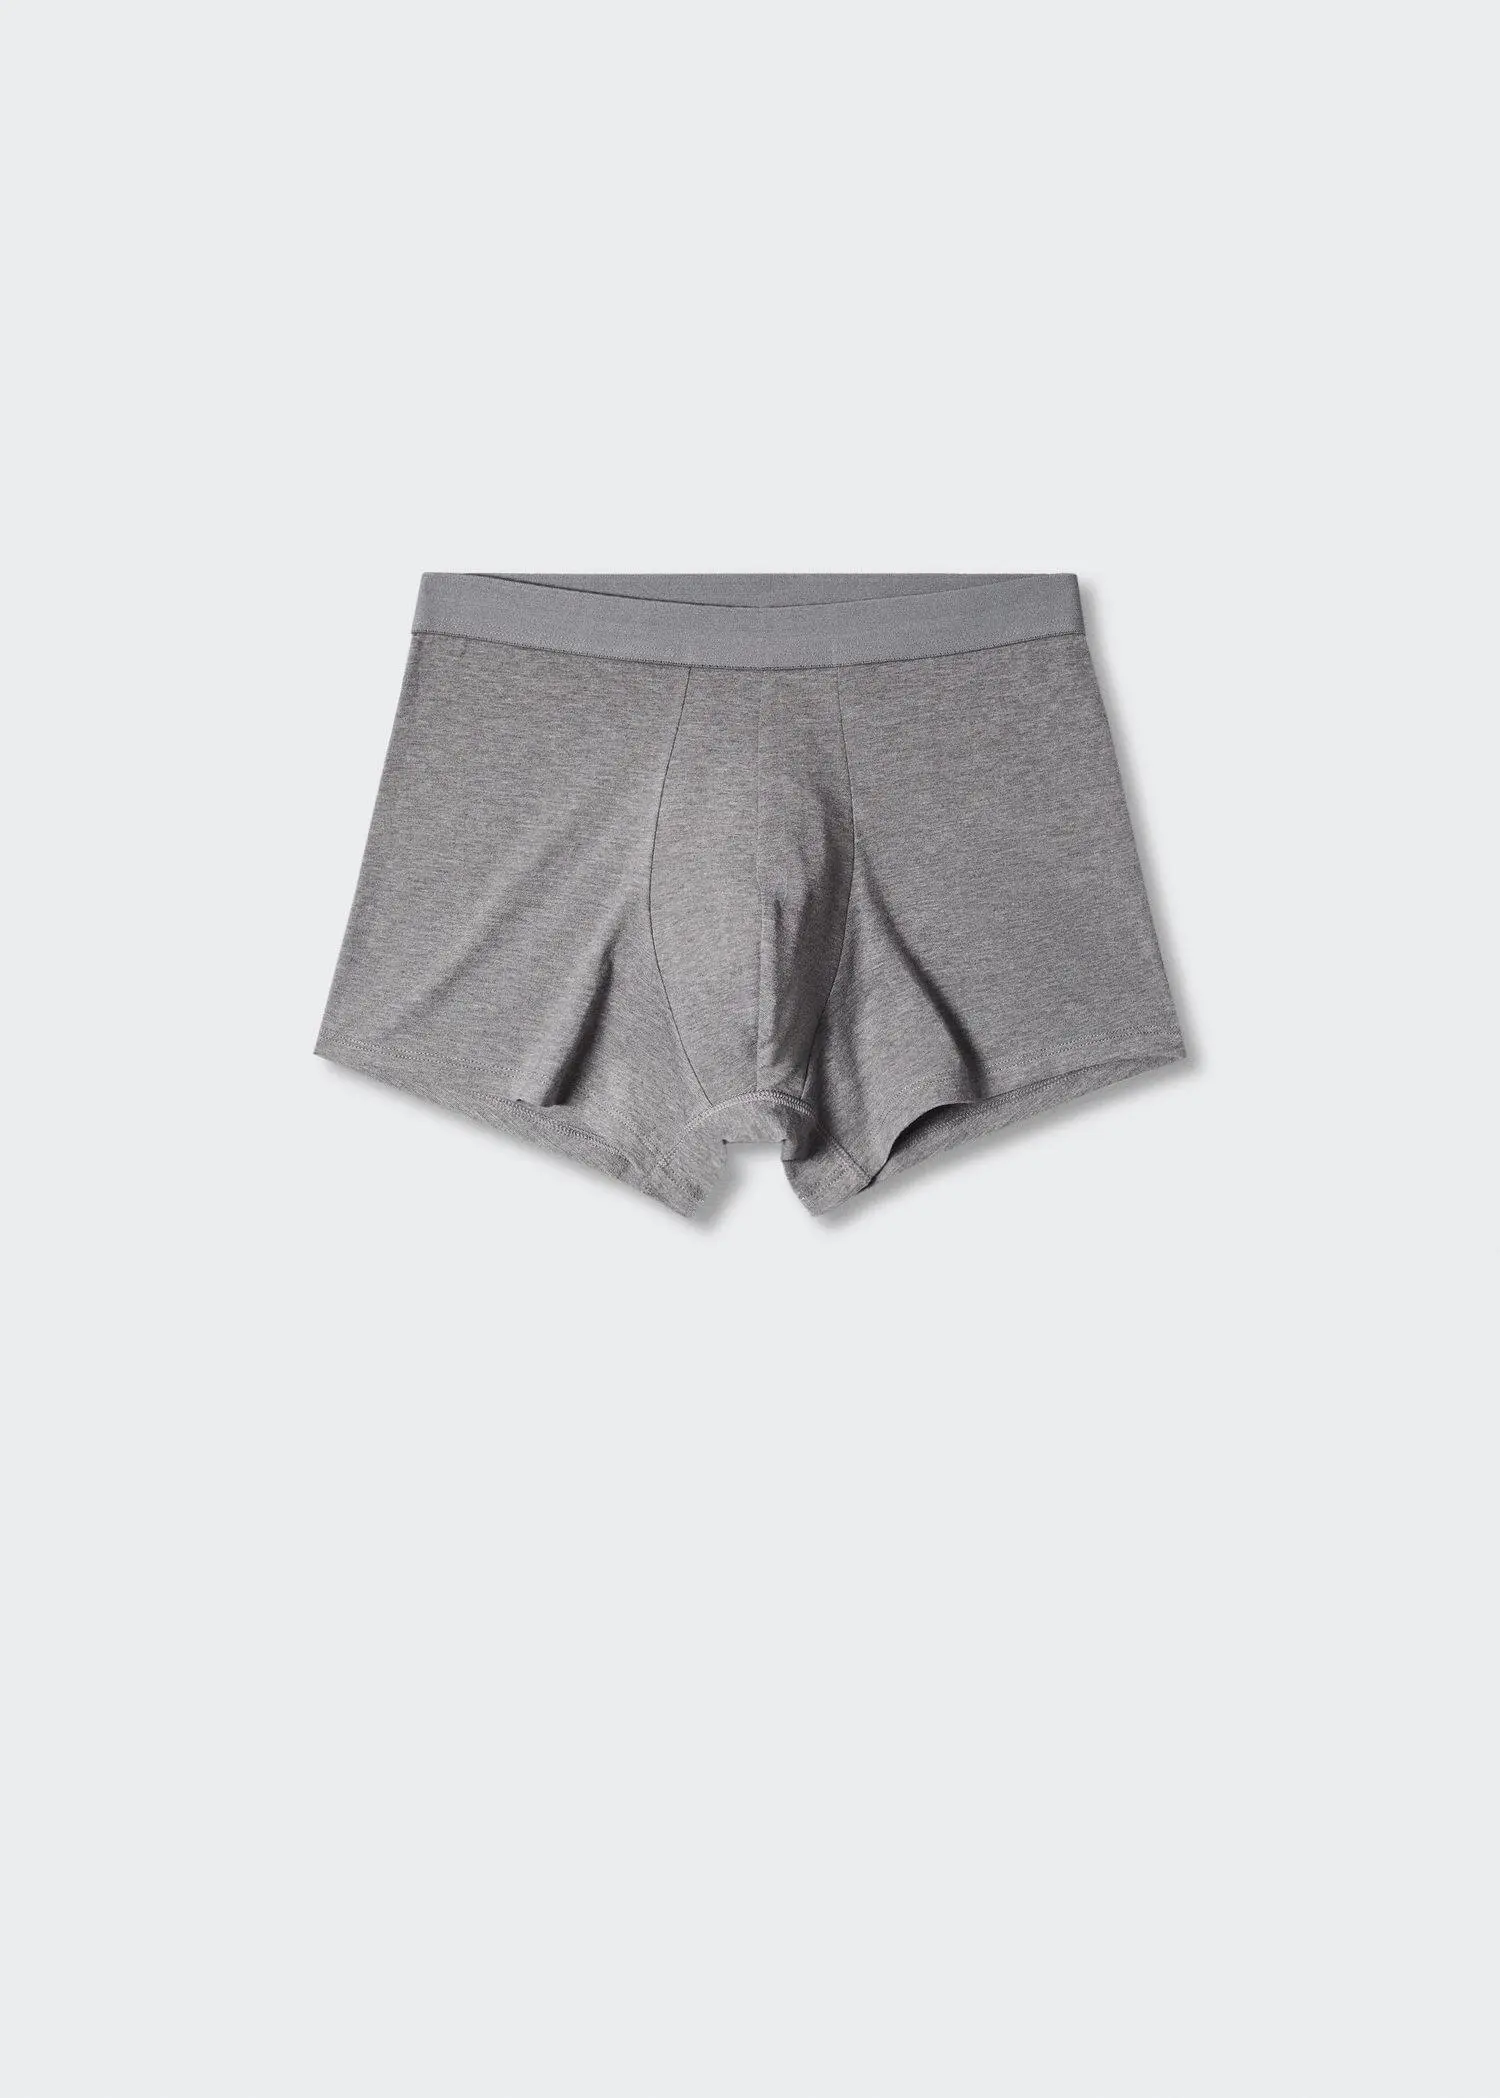 Mango 3-pack cotton boxers. a pair of gray boxers are on a white background. 